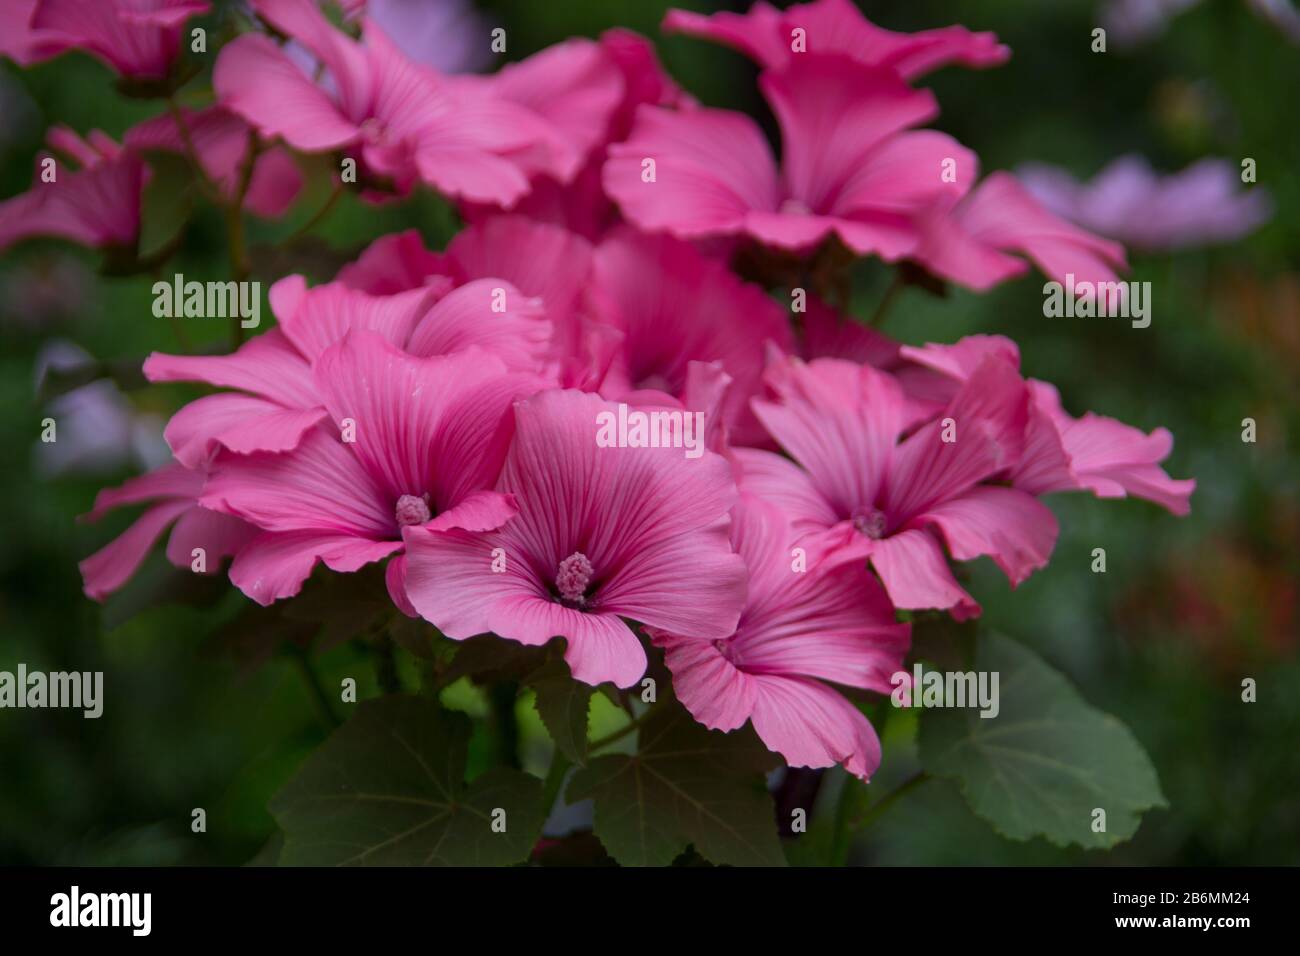 red violet mallow flowers with stamens Stock Photo